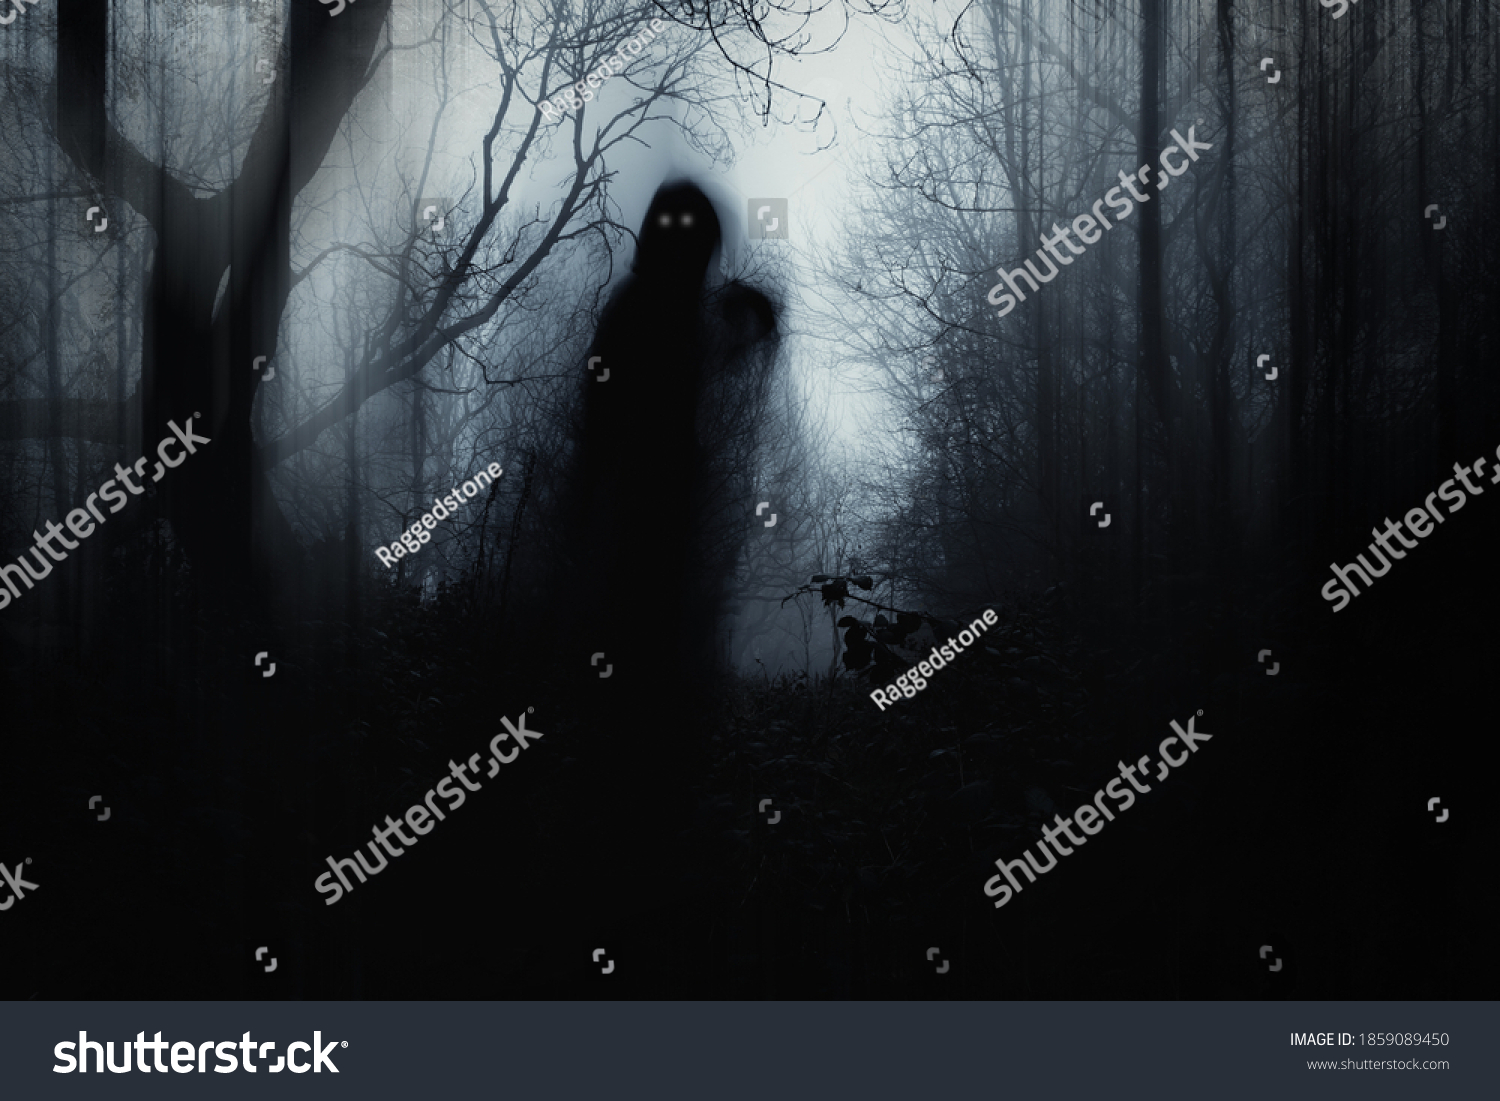 A scary hooded figure with glowing eyes in a spooky forest on a foggy winters day. With a artistic, blurred, abstract, grunge edit. #1859089450